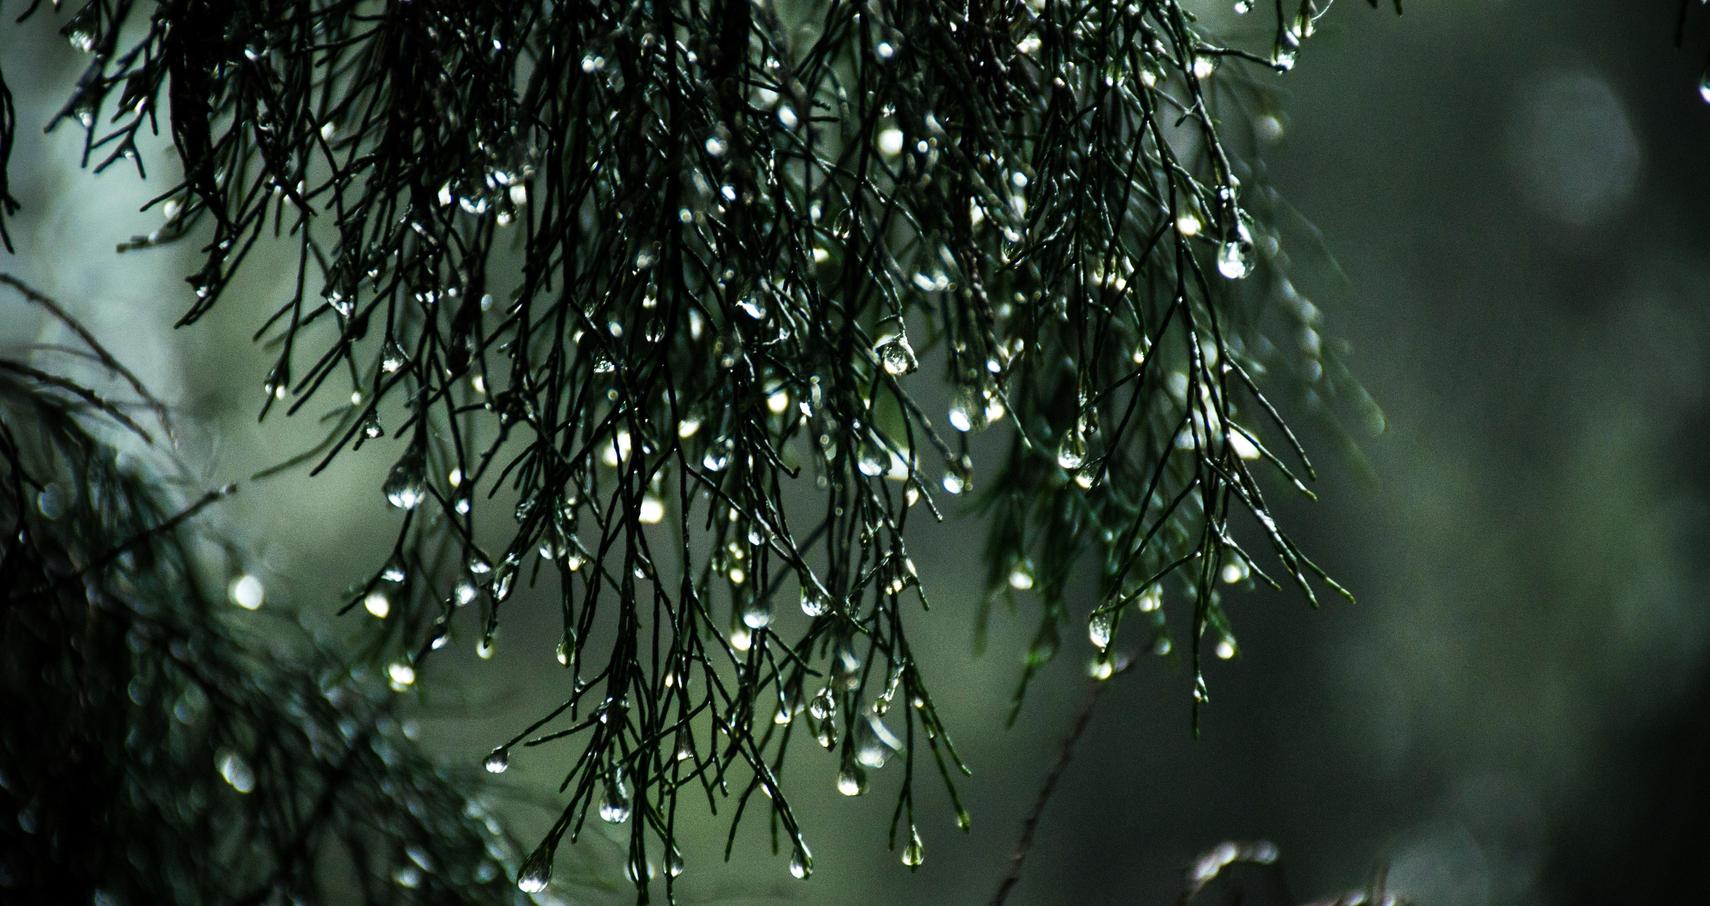 Rain Photography: A Complete Guide to Taking Photos in the Rain